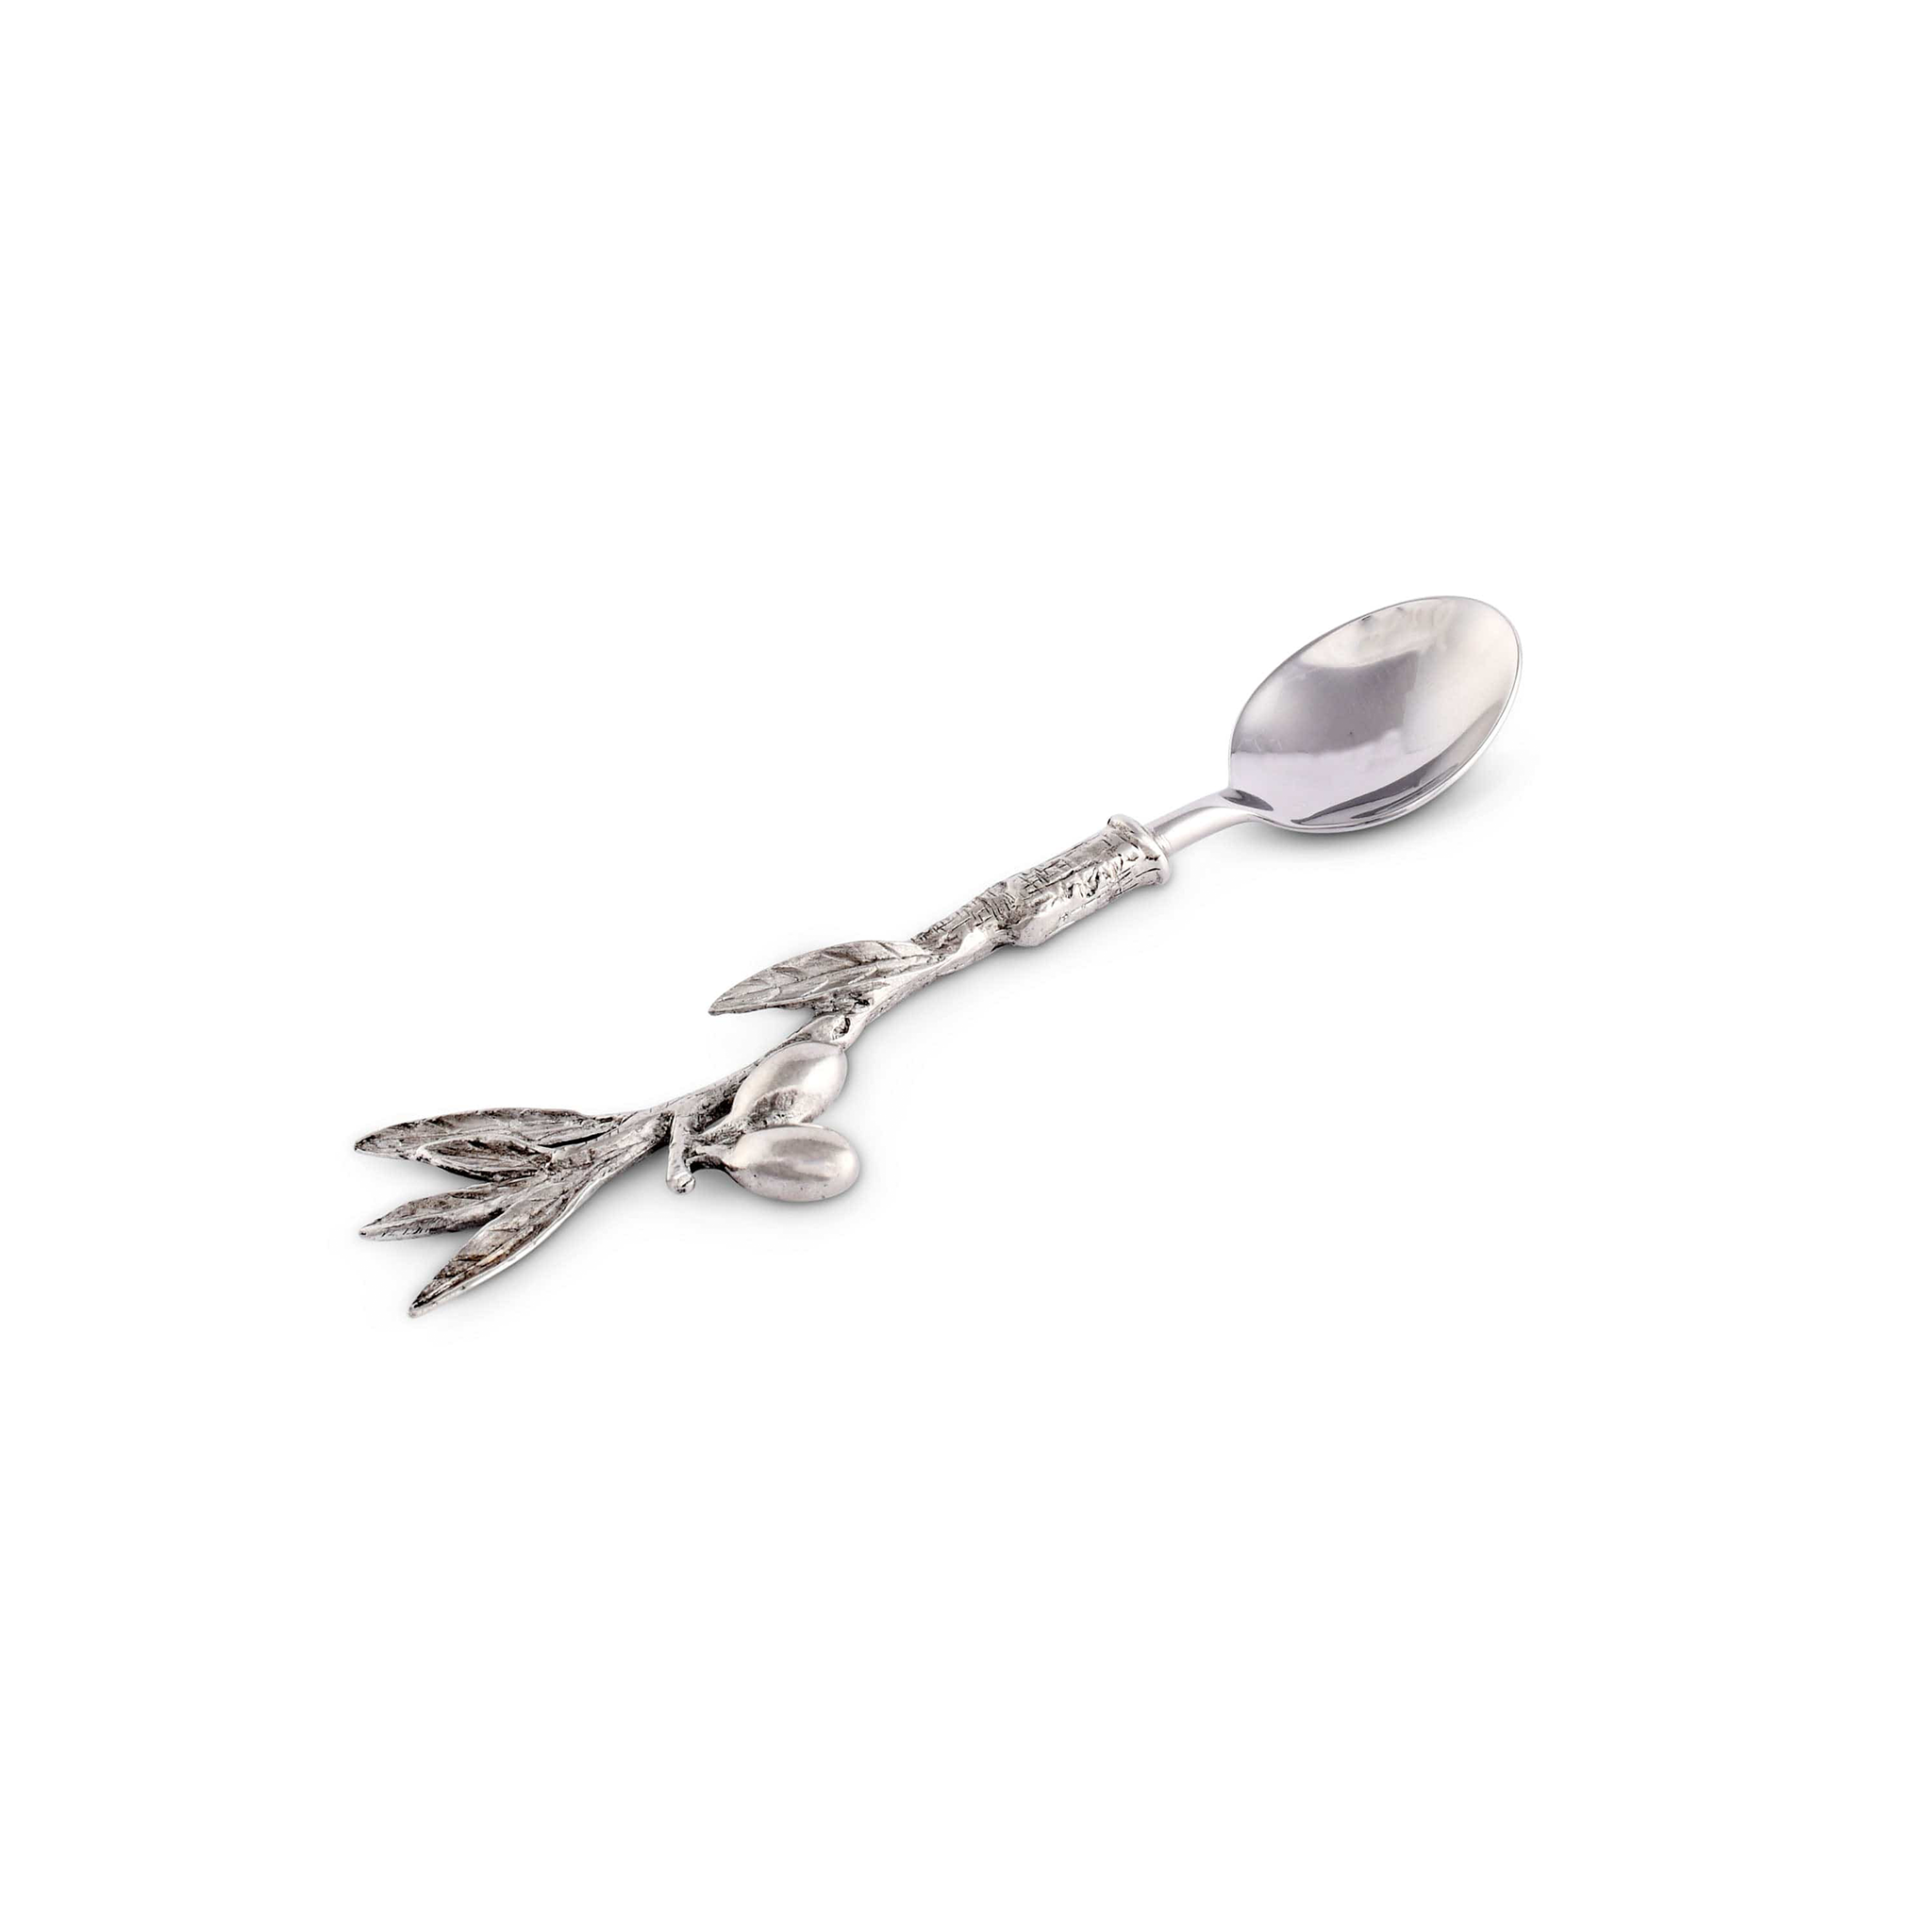 a spoon with a olive branch design on it